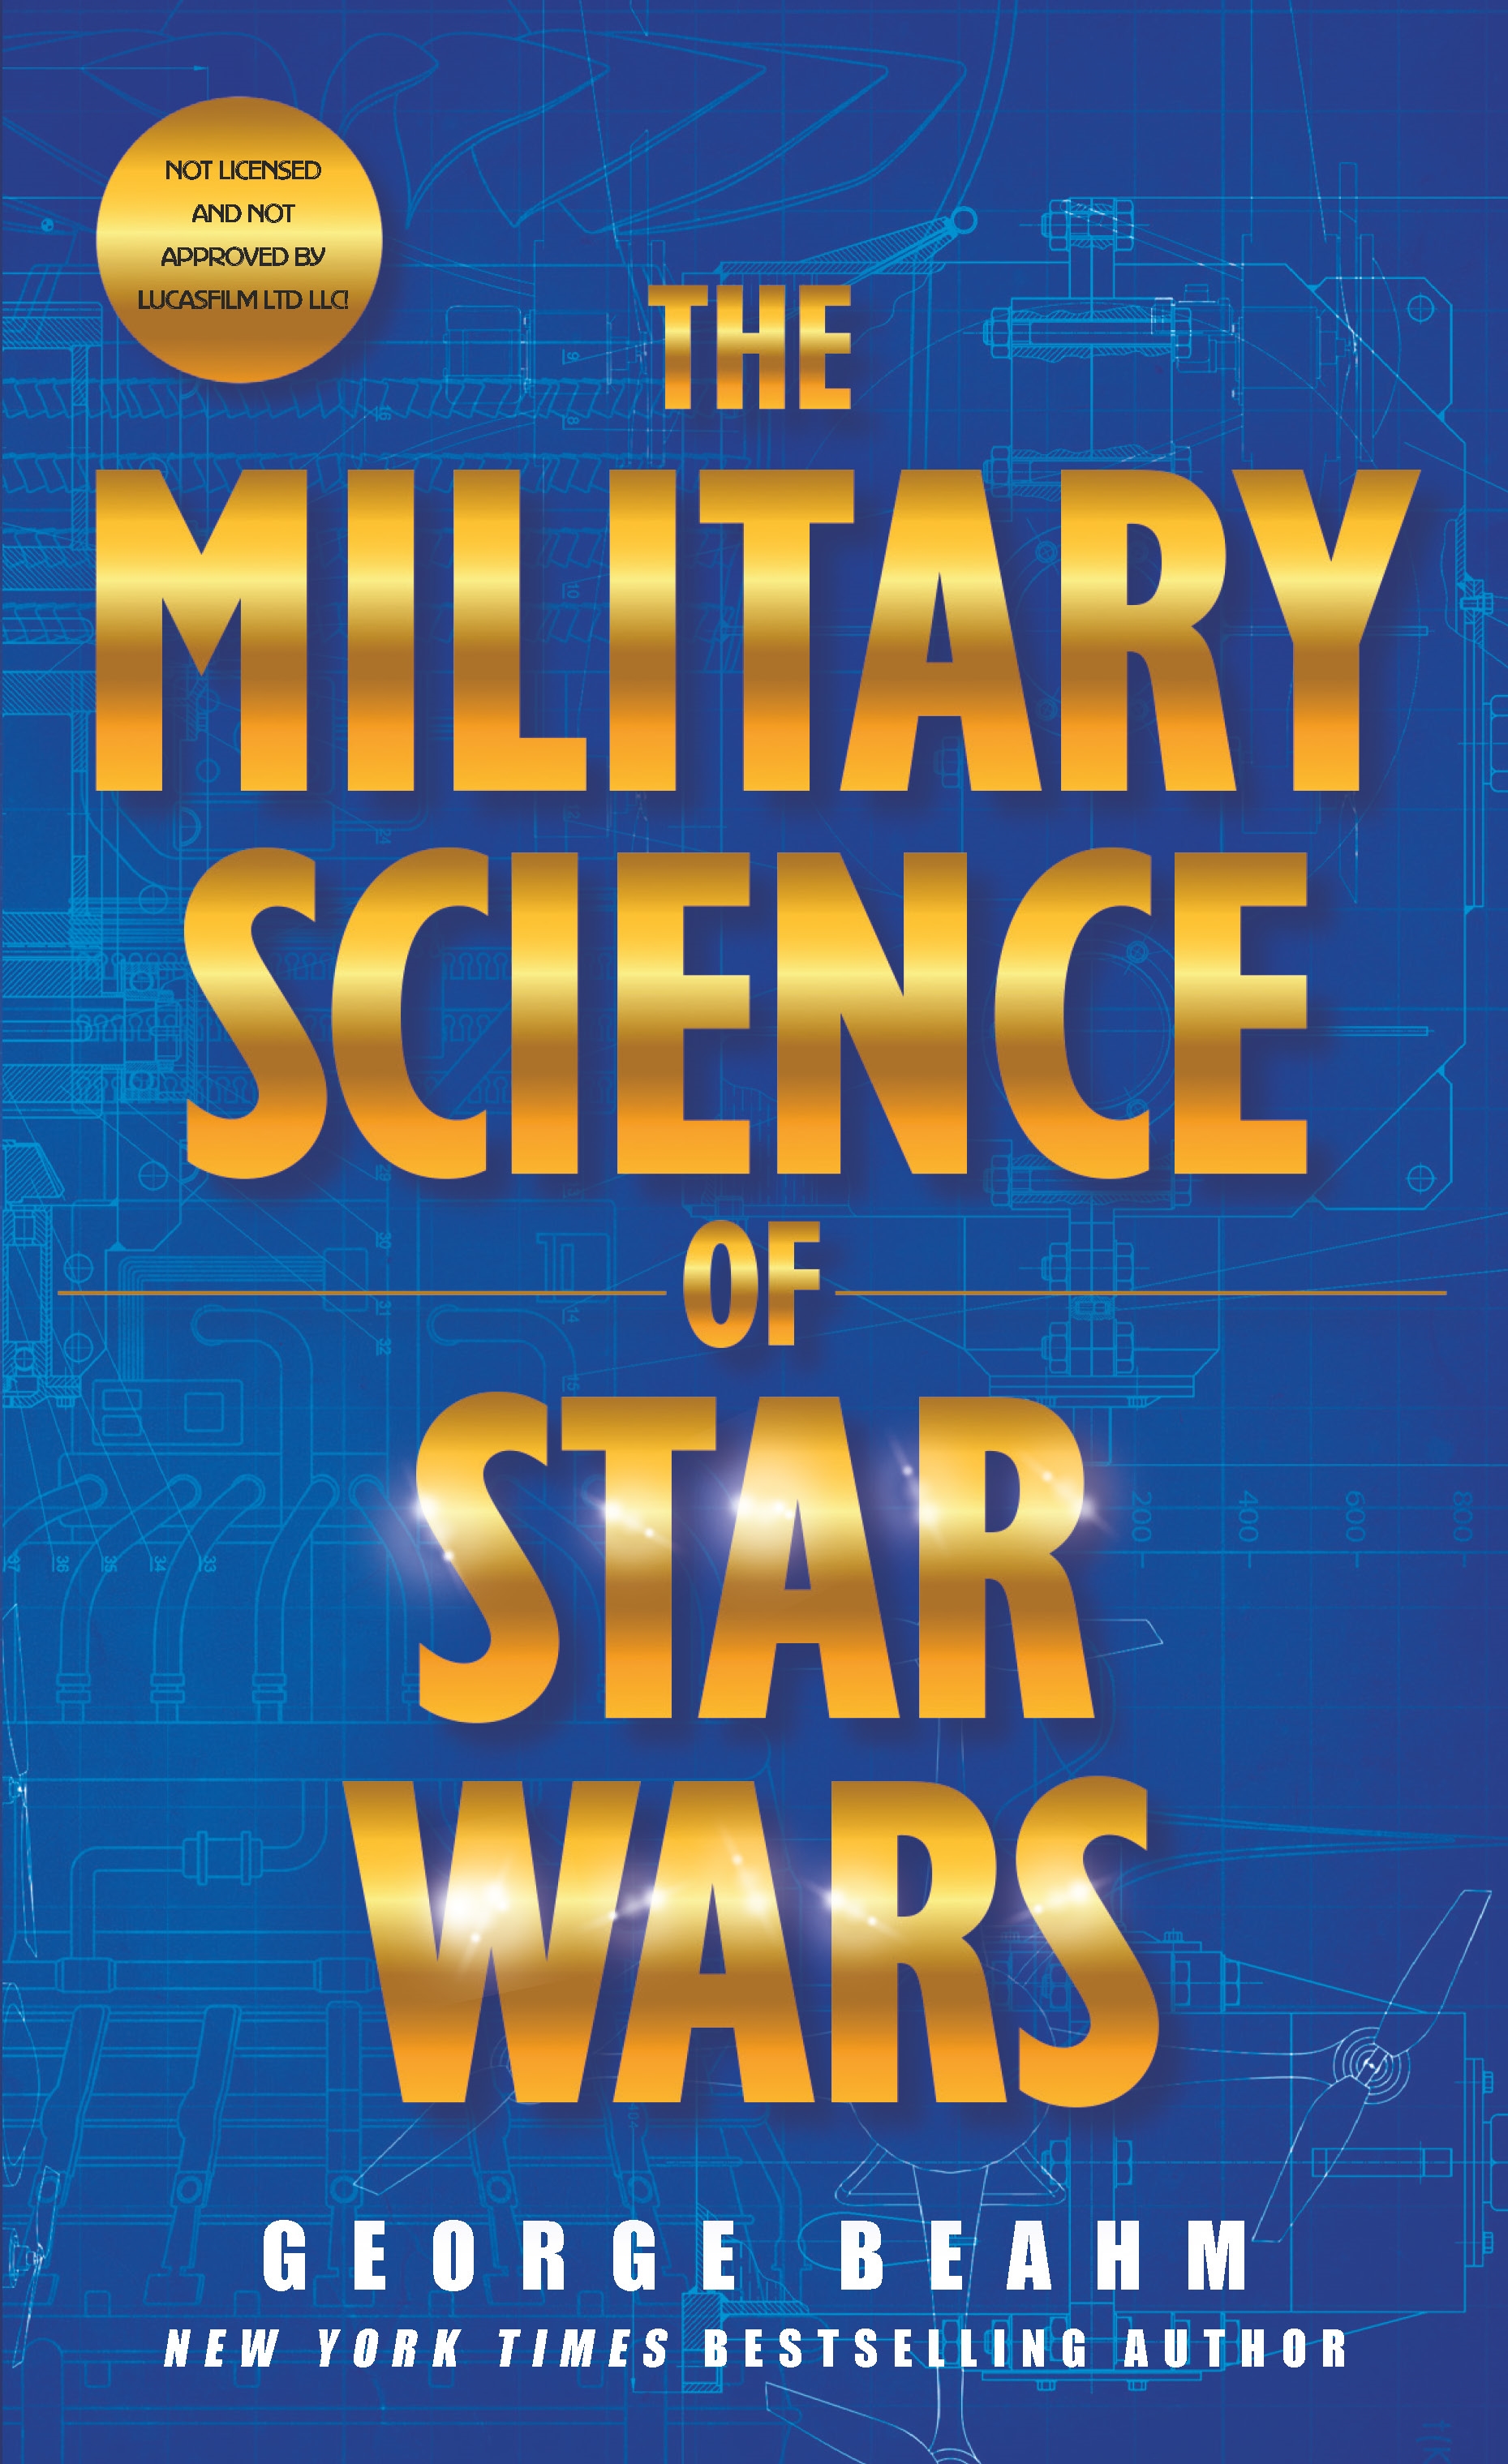 The Military Science of Star Wars by George Beahm